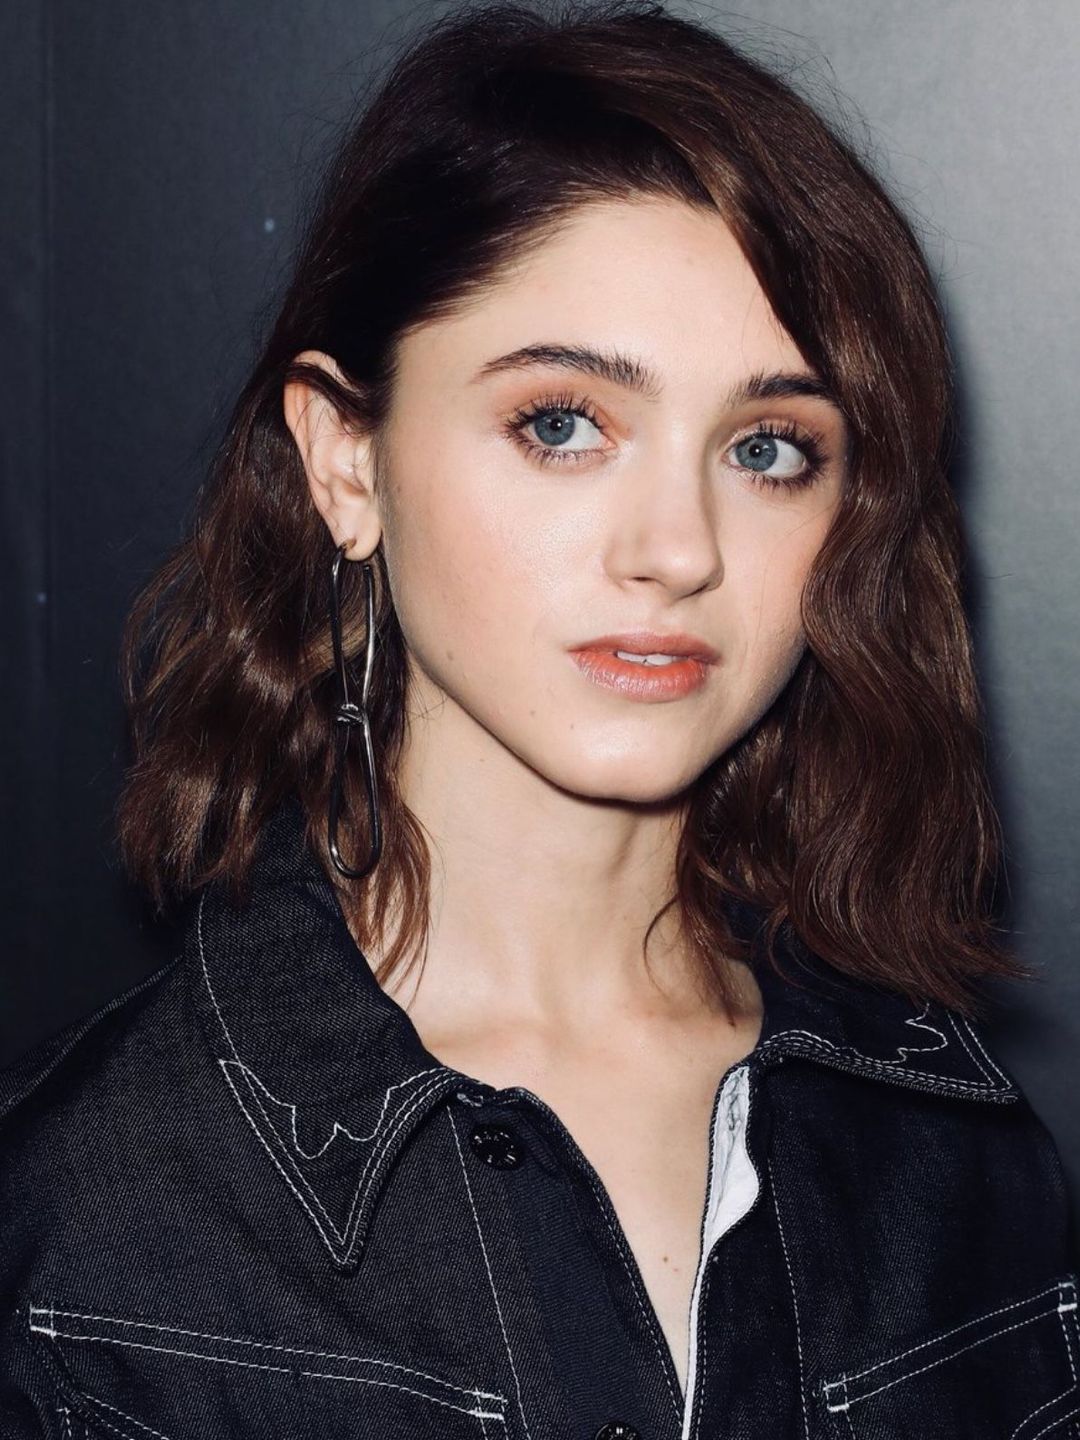 Natalia Dyer in her youth